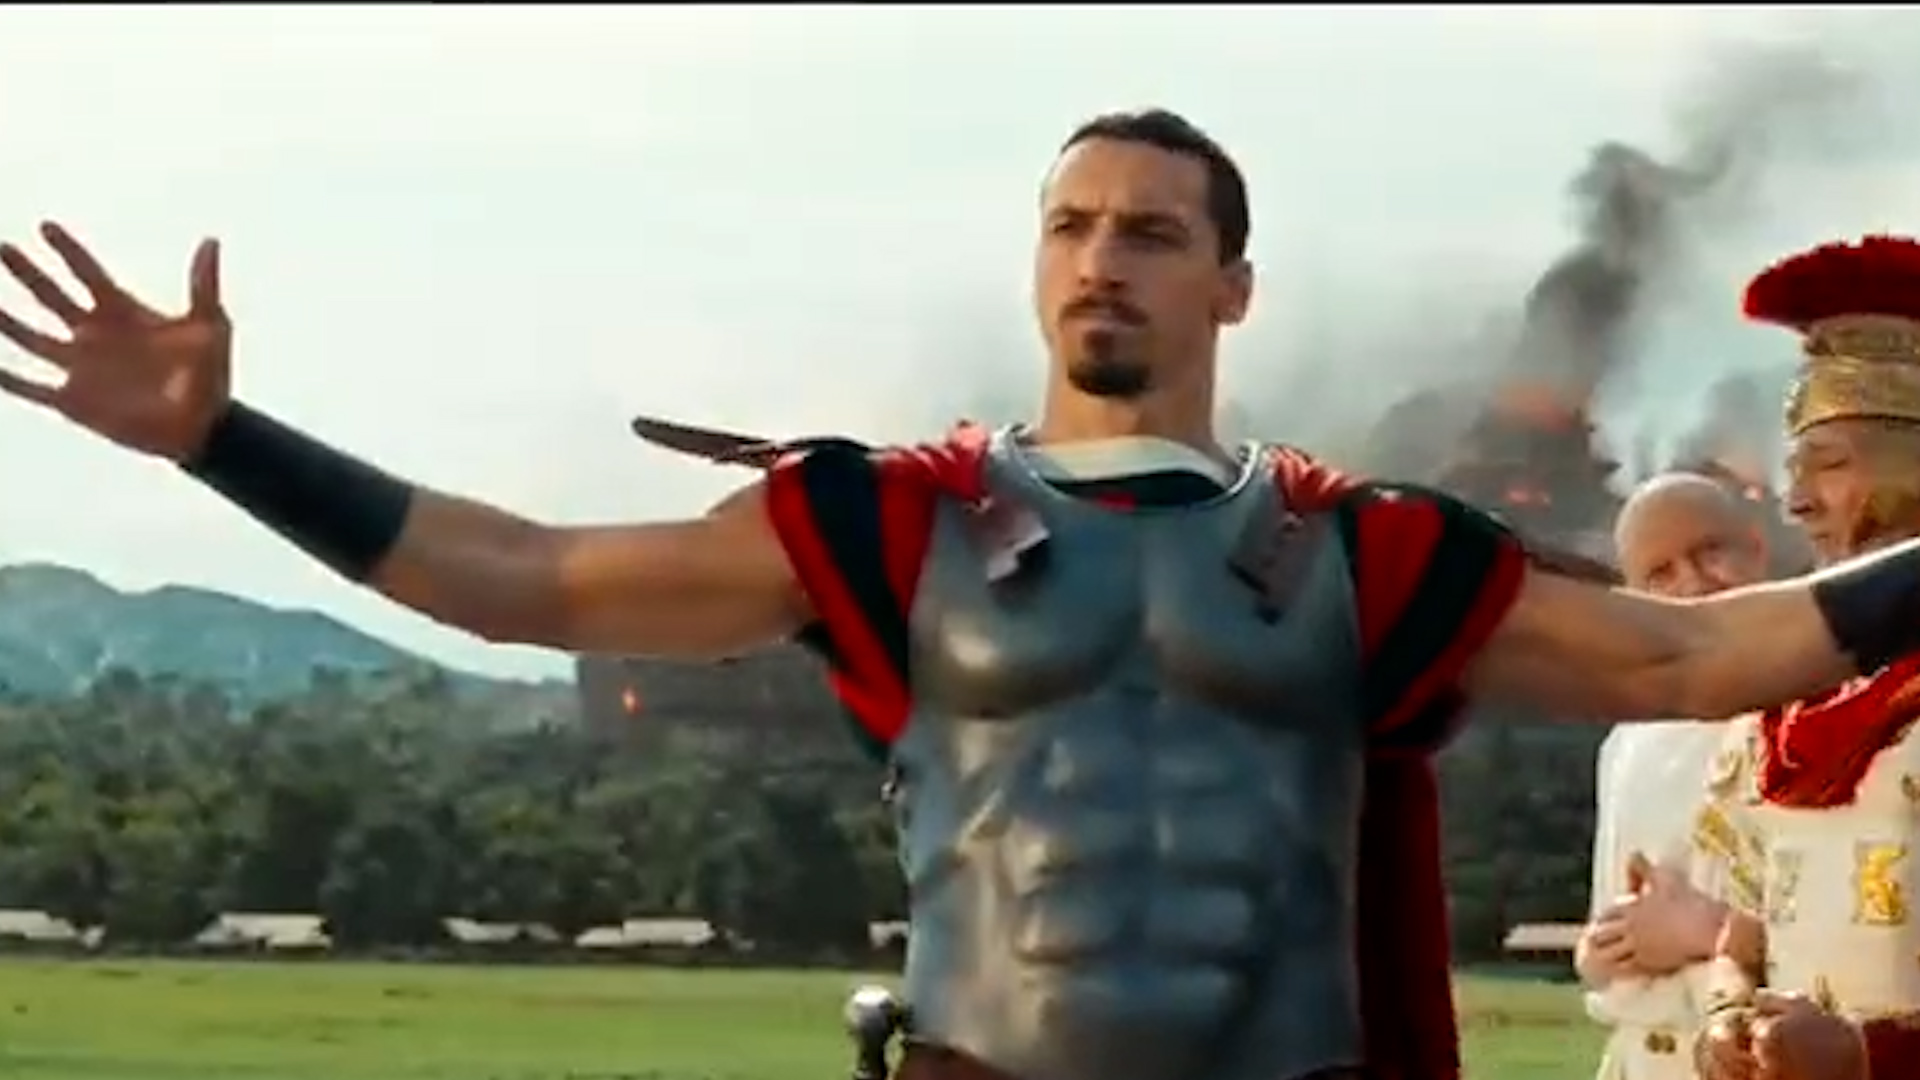 First glimpse of Zlatan Ibrahimovic in his acting debut